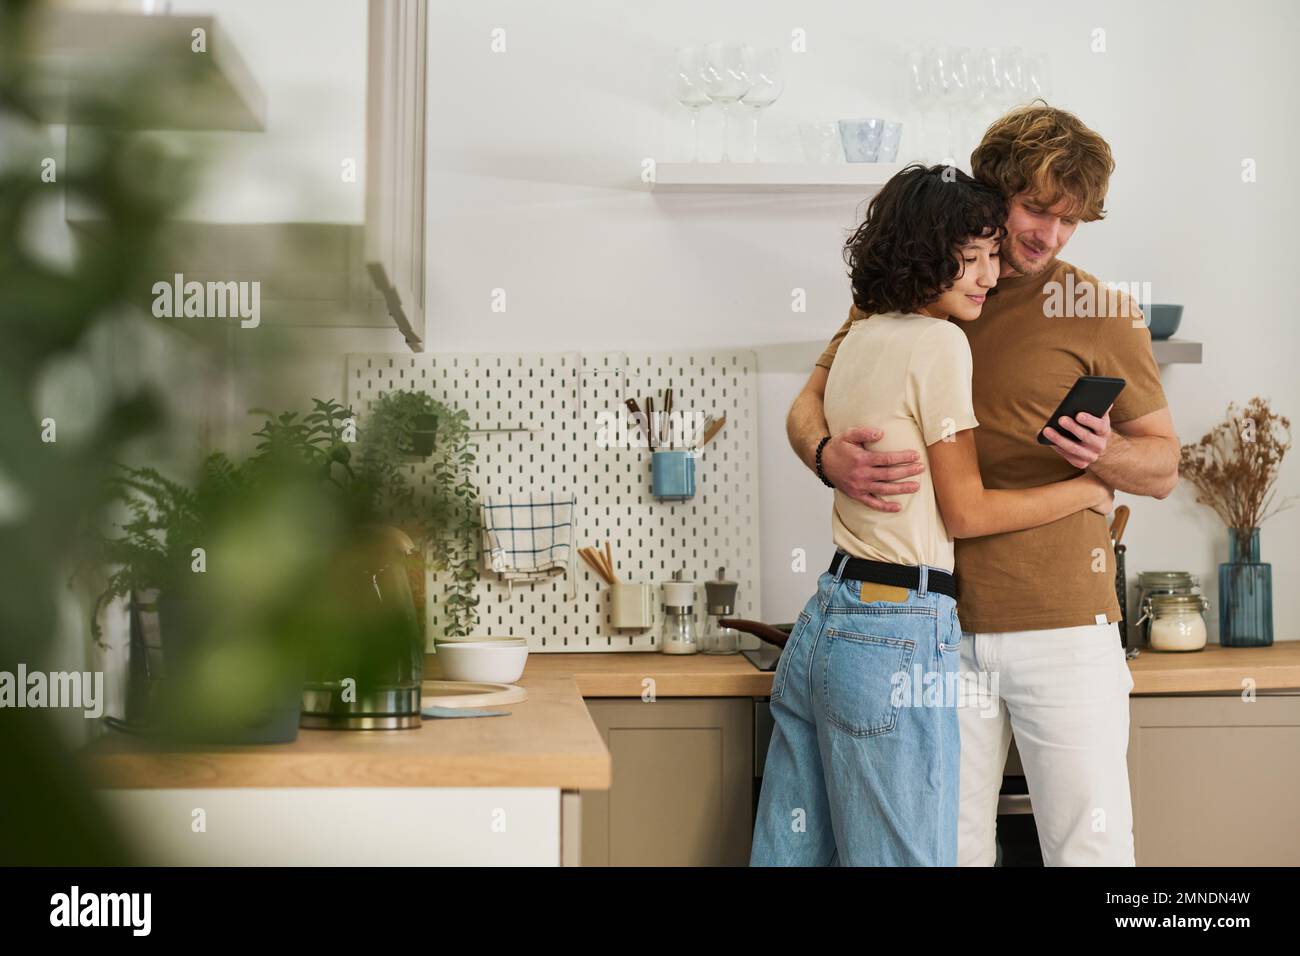 Young woman embracing her husband and both looking at screen of smartphone held by man while standing in the kitchen Stock Photo